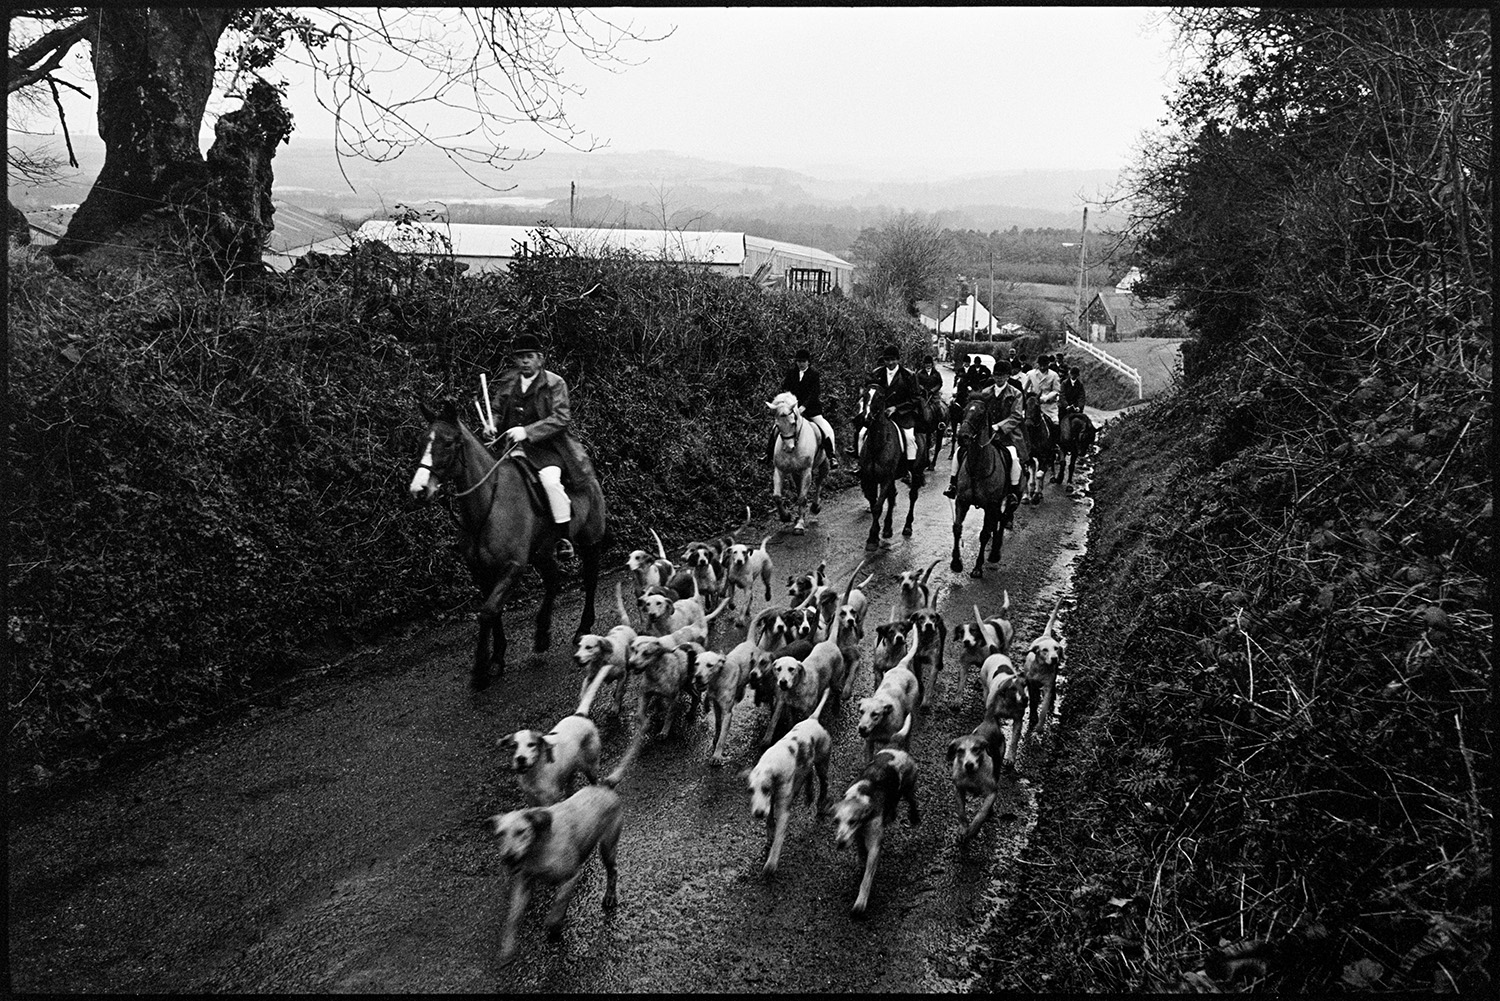 Hunt meet in village, setting off, horses and riders waiting in rain on lonely road. 
[Huntsmen on horseback setting off on a hunt with hounds, along a lane in Petrockstowe.]